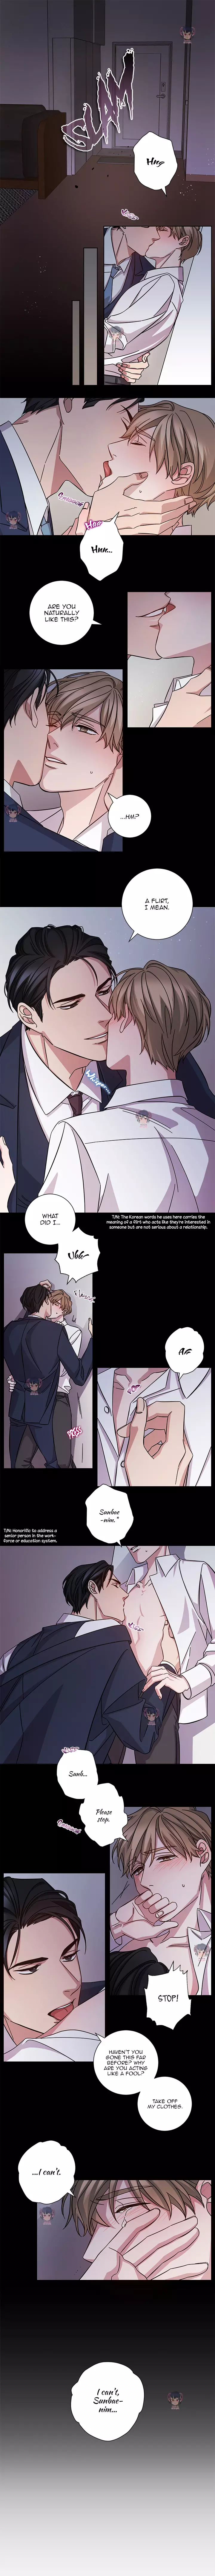 Ways Of Parting - 1 page 4